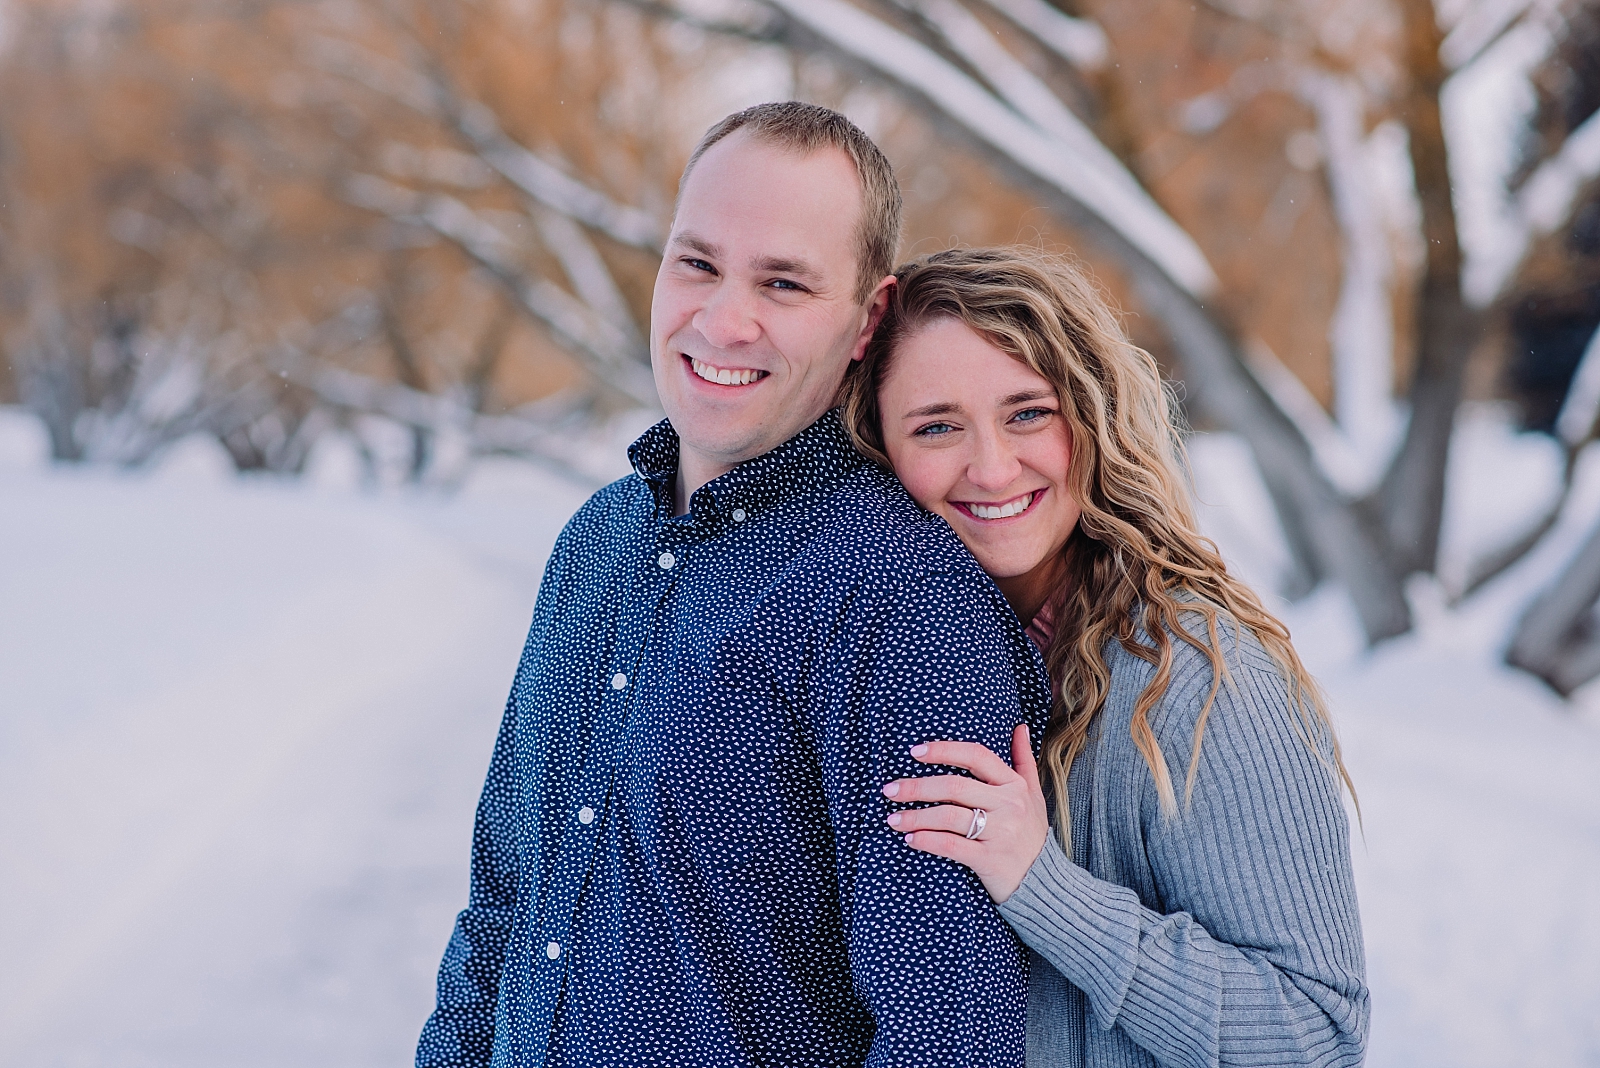 engaged couple posing ideas and prompts hugging each other cuddled engagement photos idaho falls freeman park snow